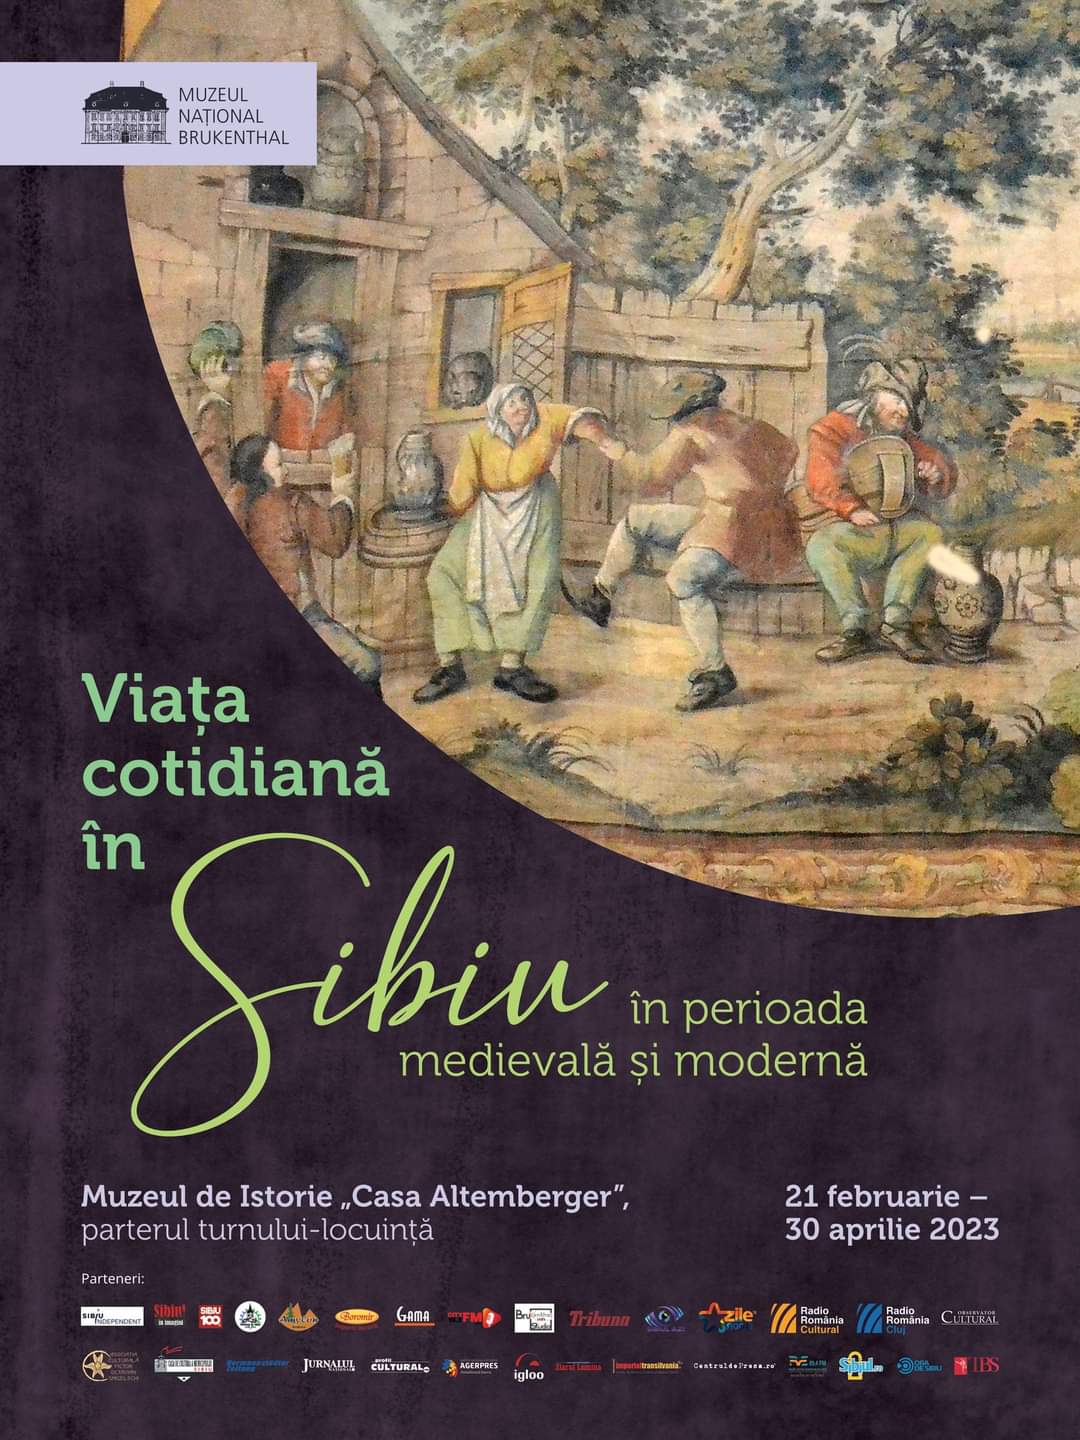 Daily life in Sibiu in the middle ages and modern period 